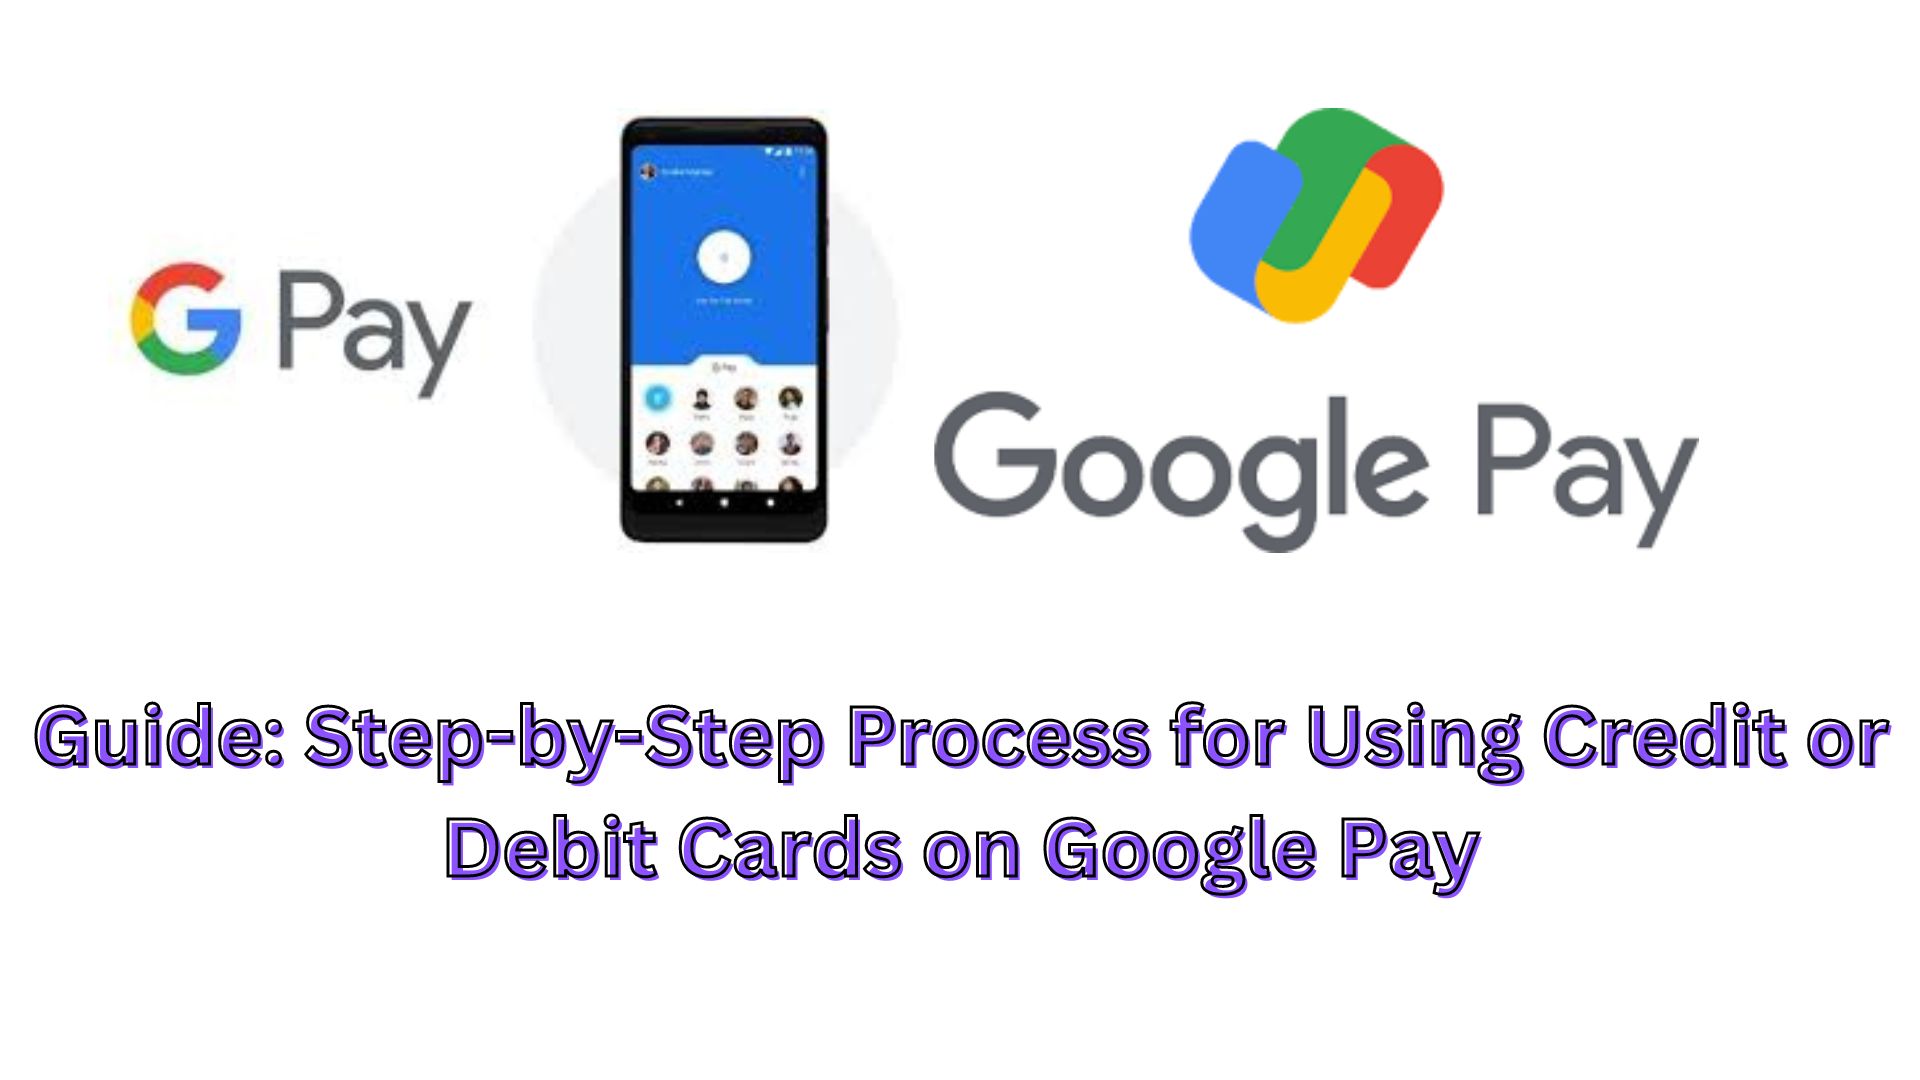 Guide: Step-by-Step Process for Using Credit or Debit Cards on Google Pay